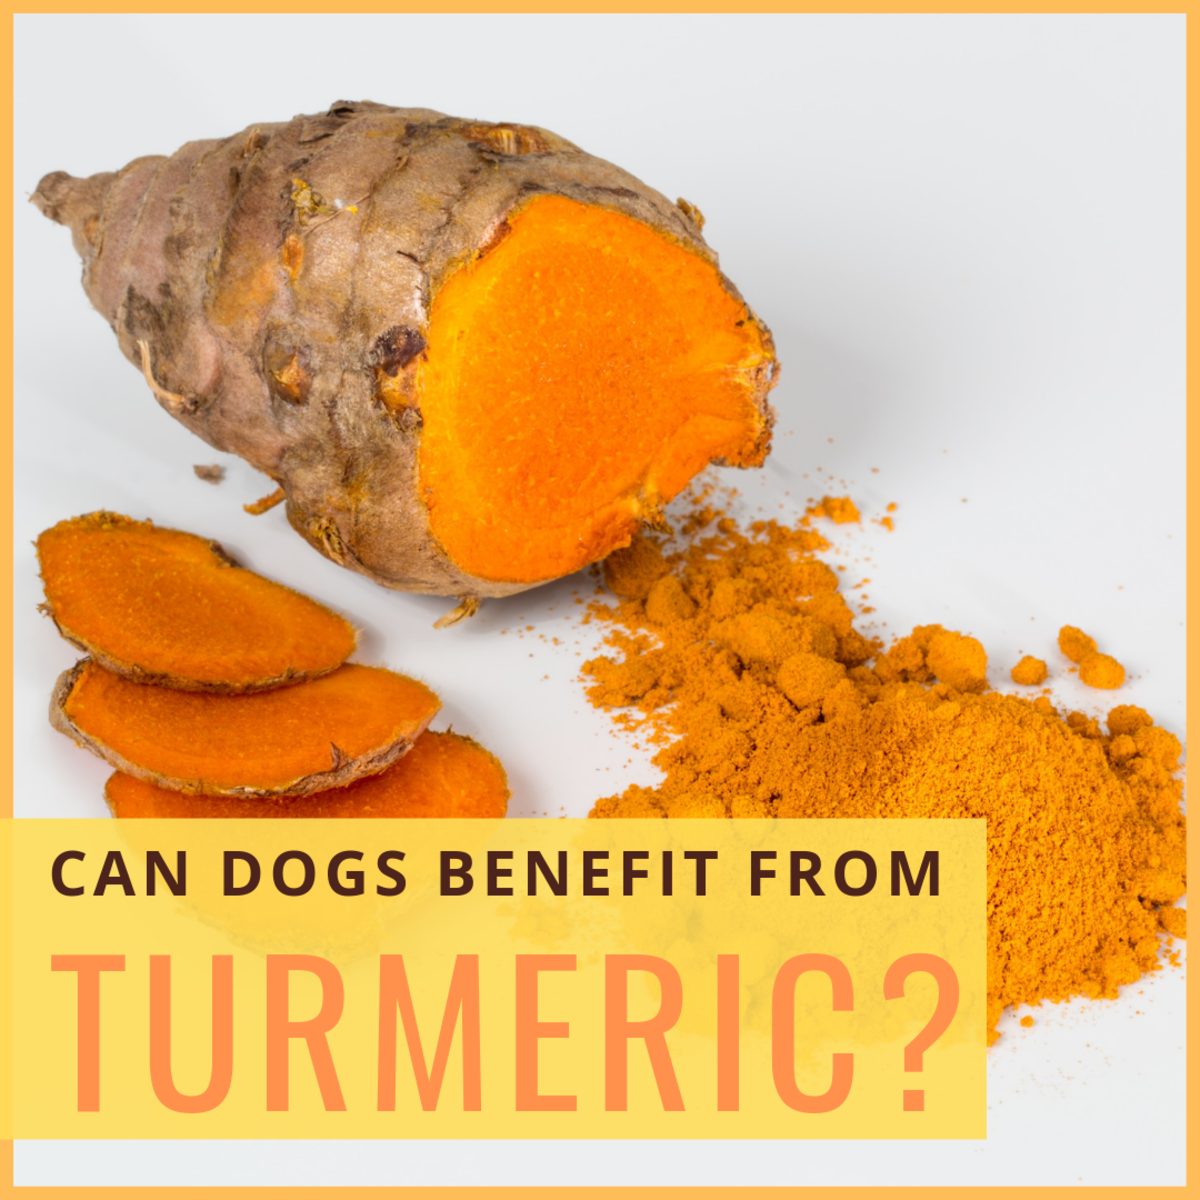 Turmeric has recently come to the fore as a superfood, but is it good for dogs?